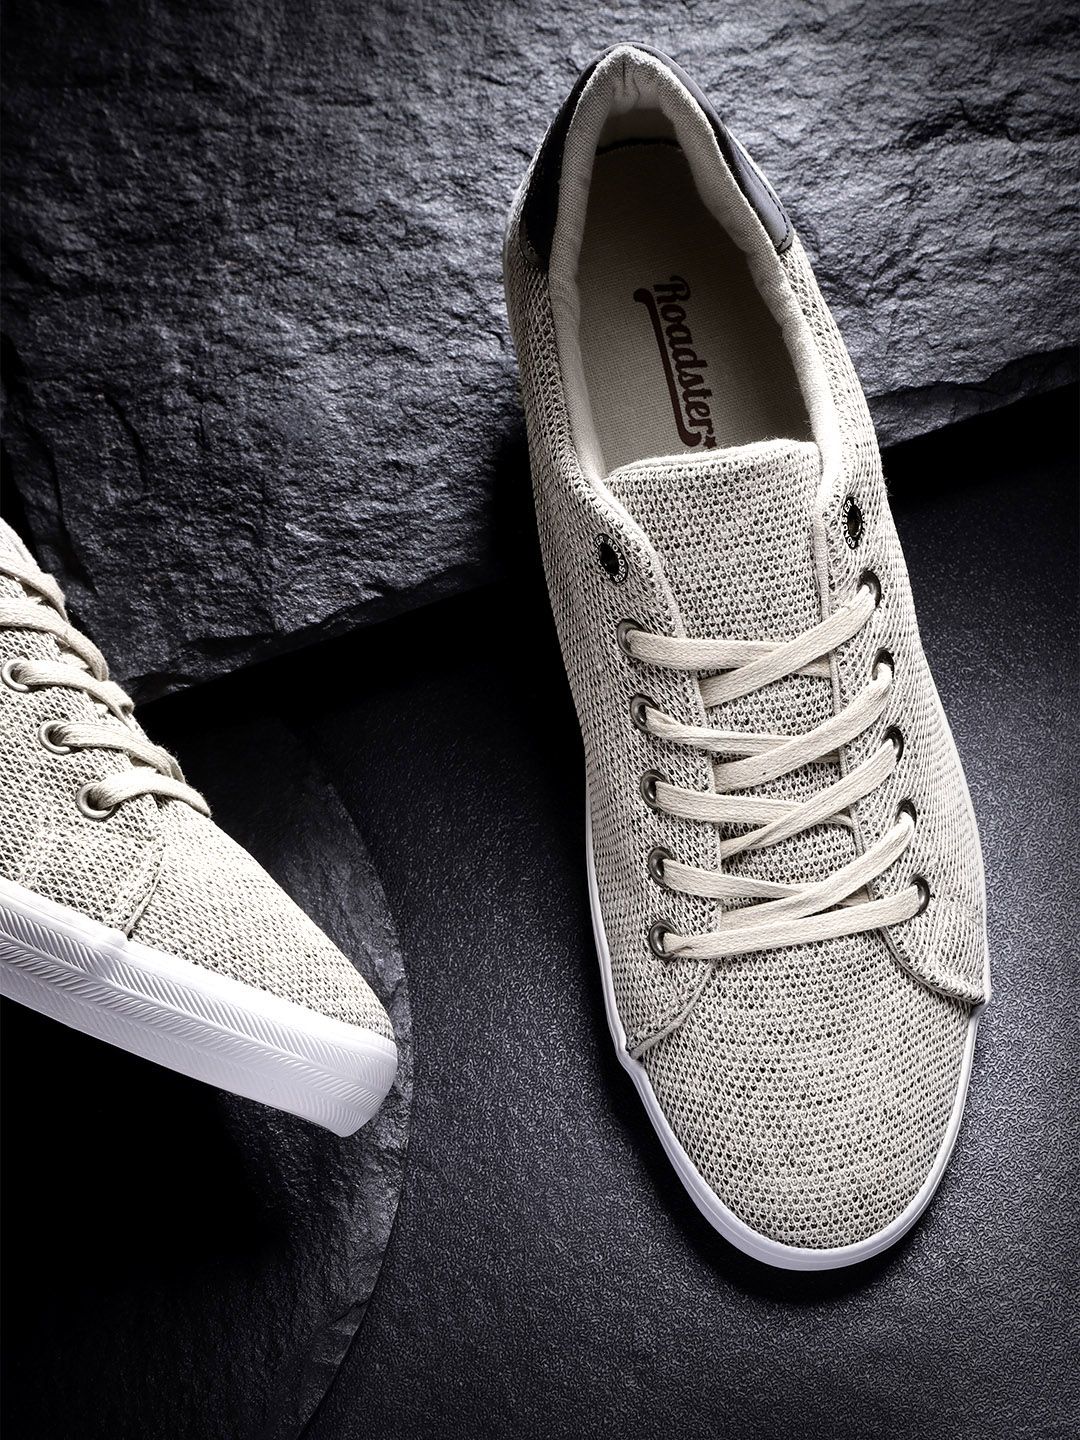 roadster olive green sneakers